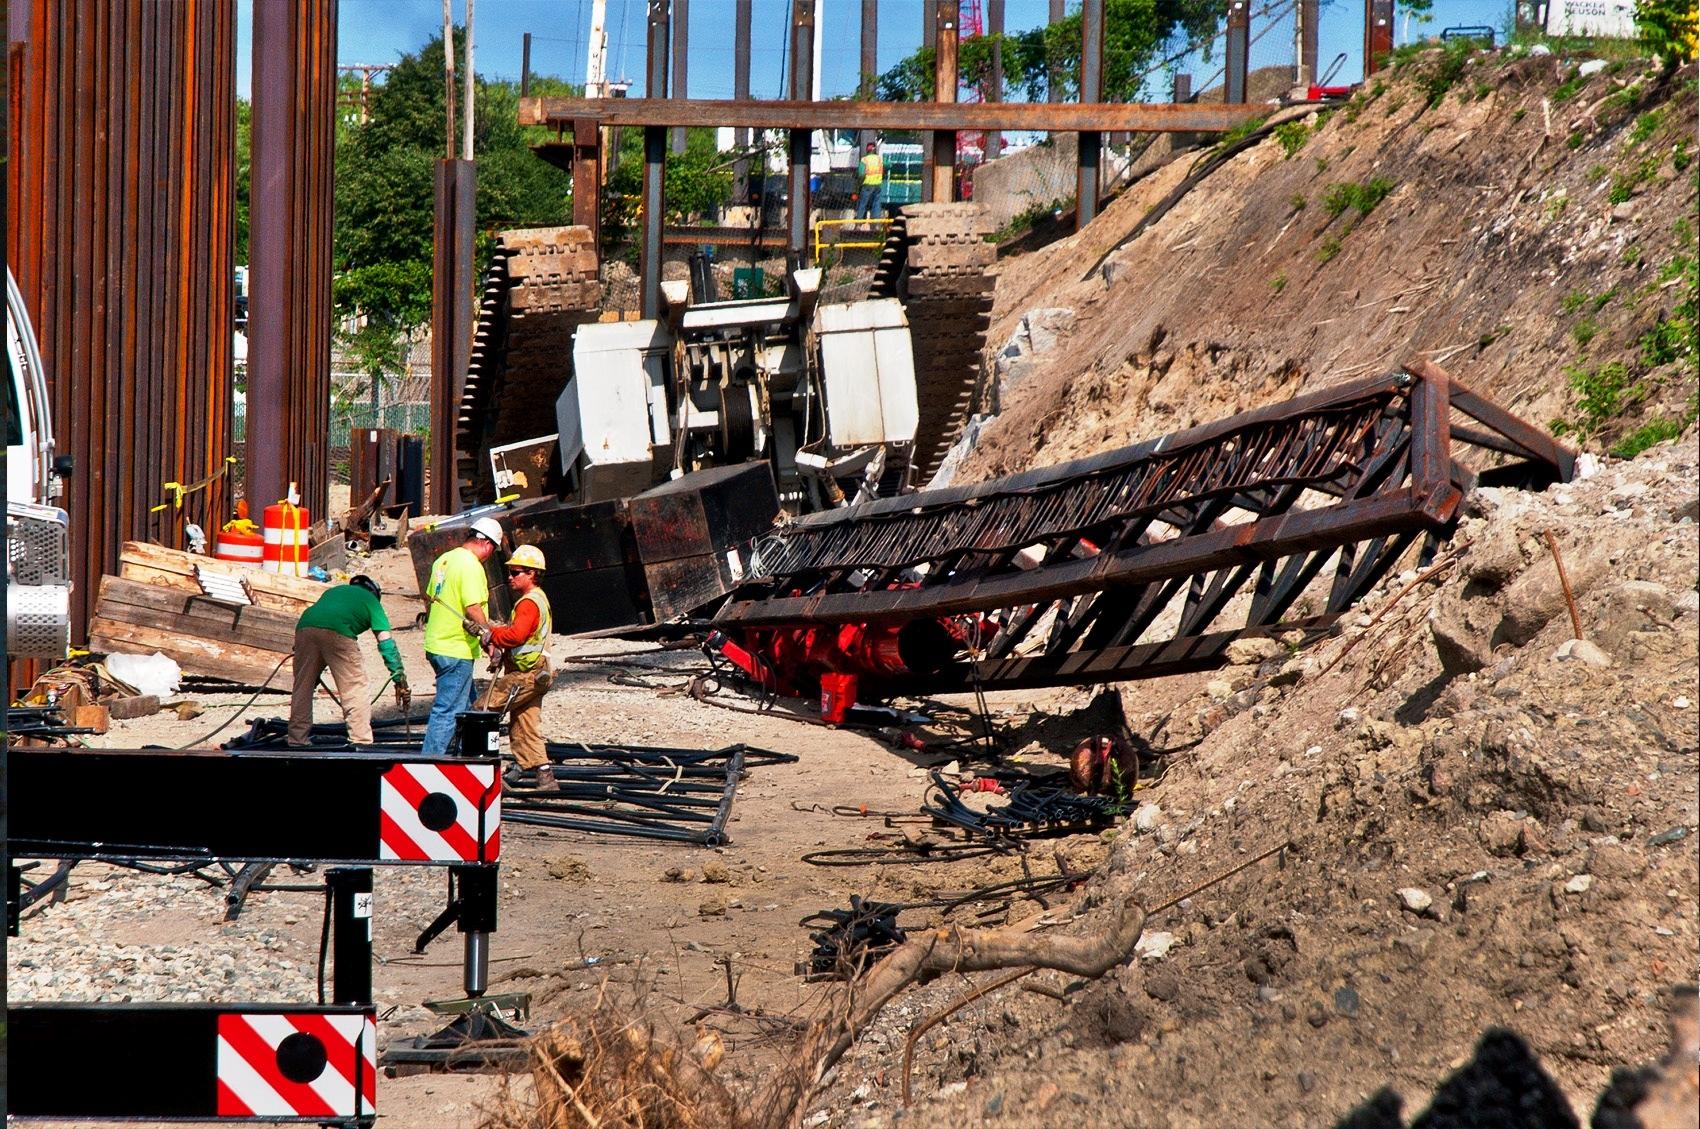 Workers continue cleaning up around a crane that toppled over on July 7 on Brainard Avenue. Photo by Greg Mirochuk